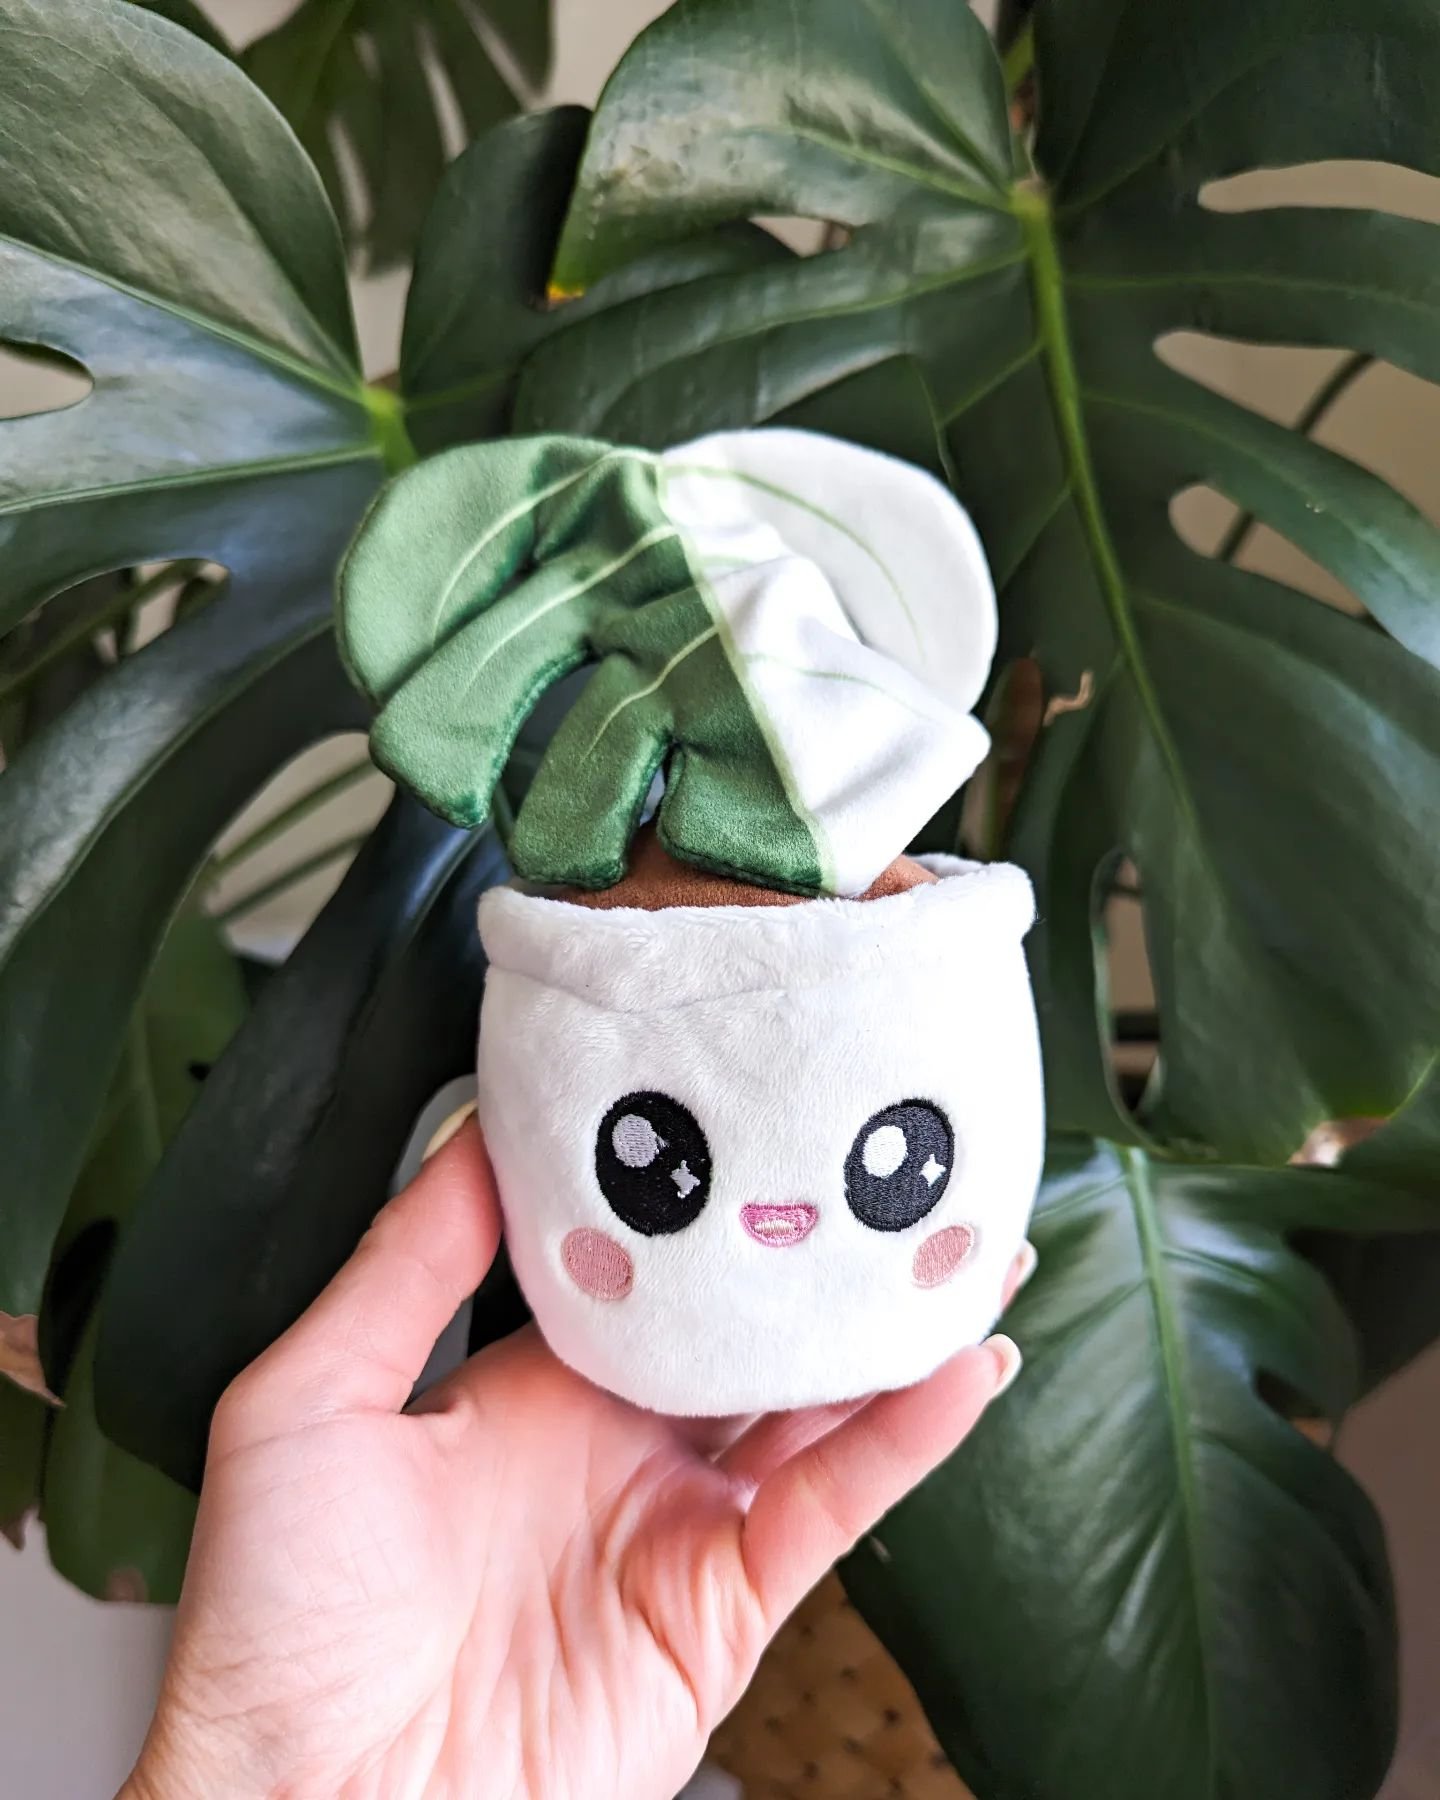 &quot;Let's root for each other and watch each other grow&quot; - 🌿

Blushiez Monstera toy is finally back in stock! Grab yours now before they sell out again! 🤭